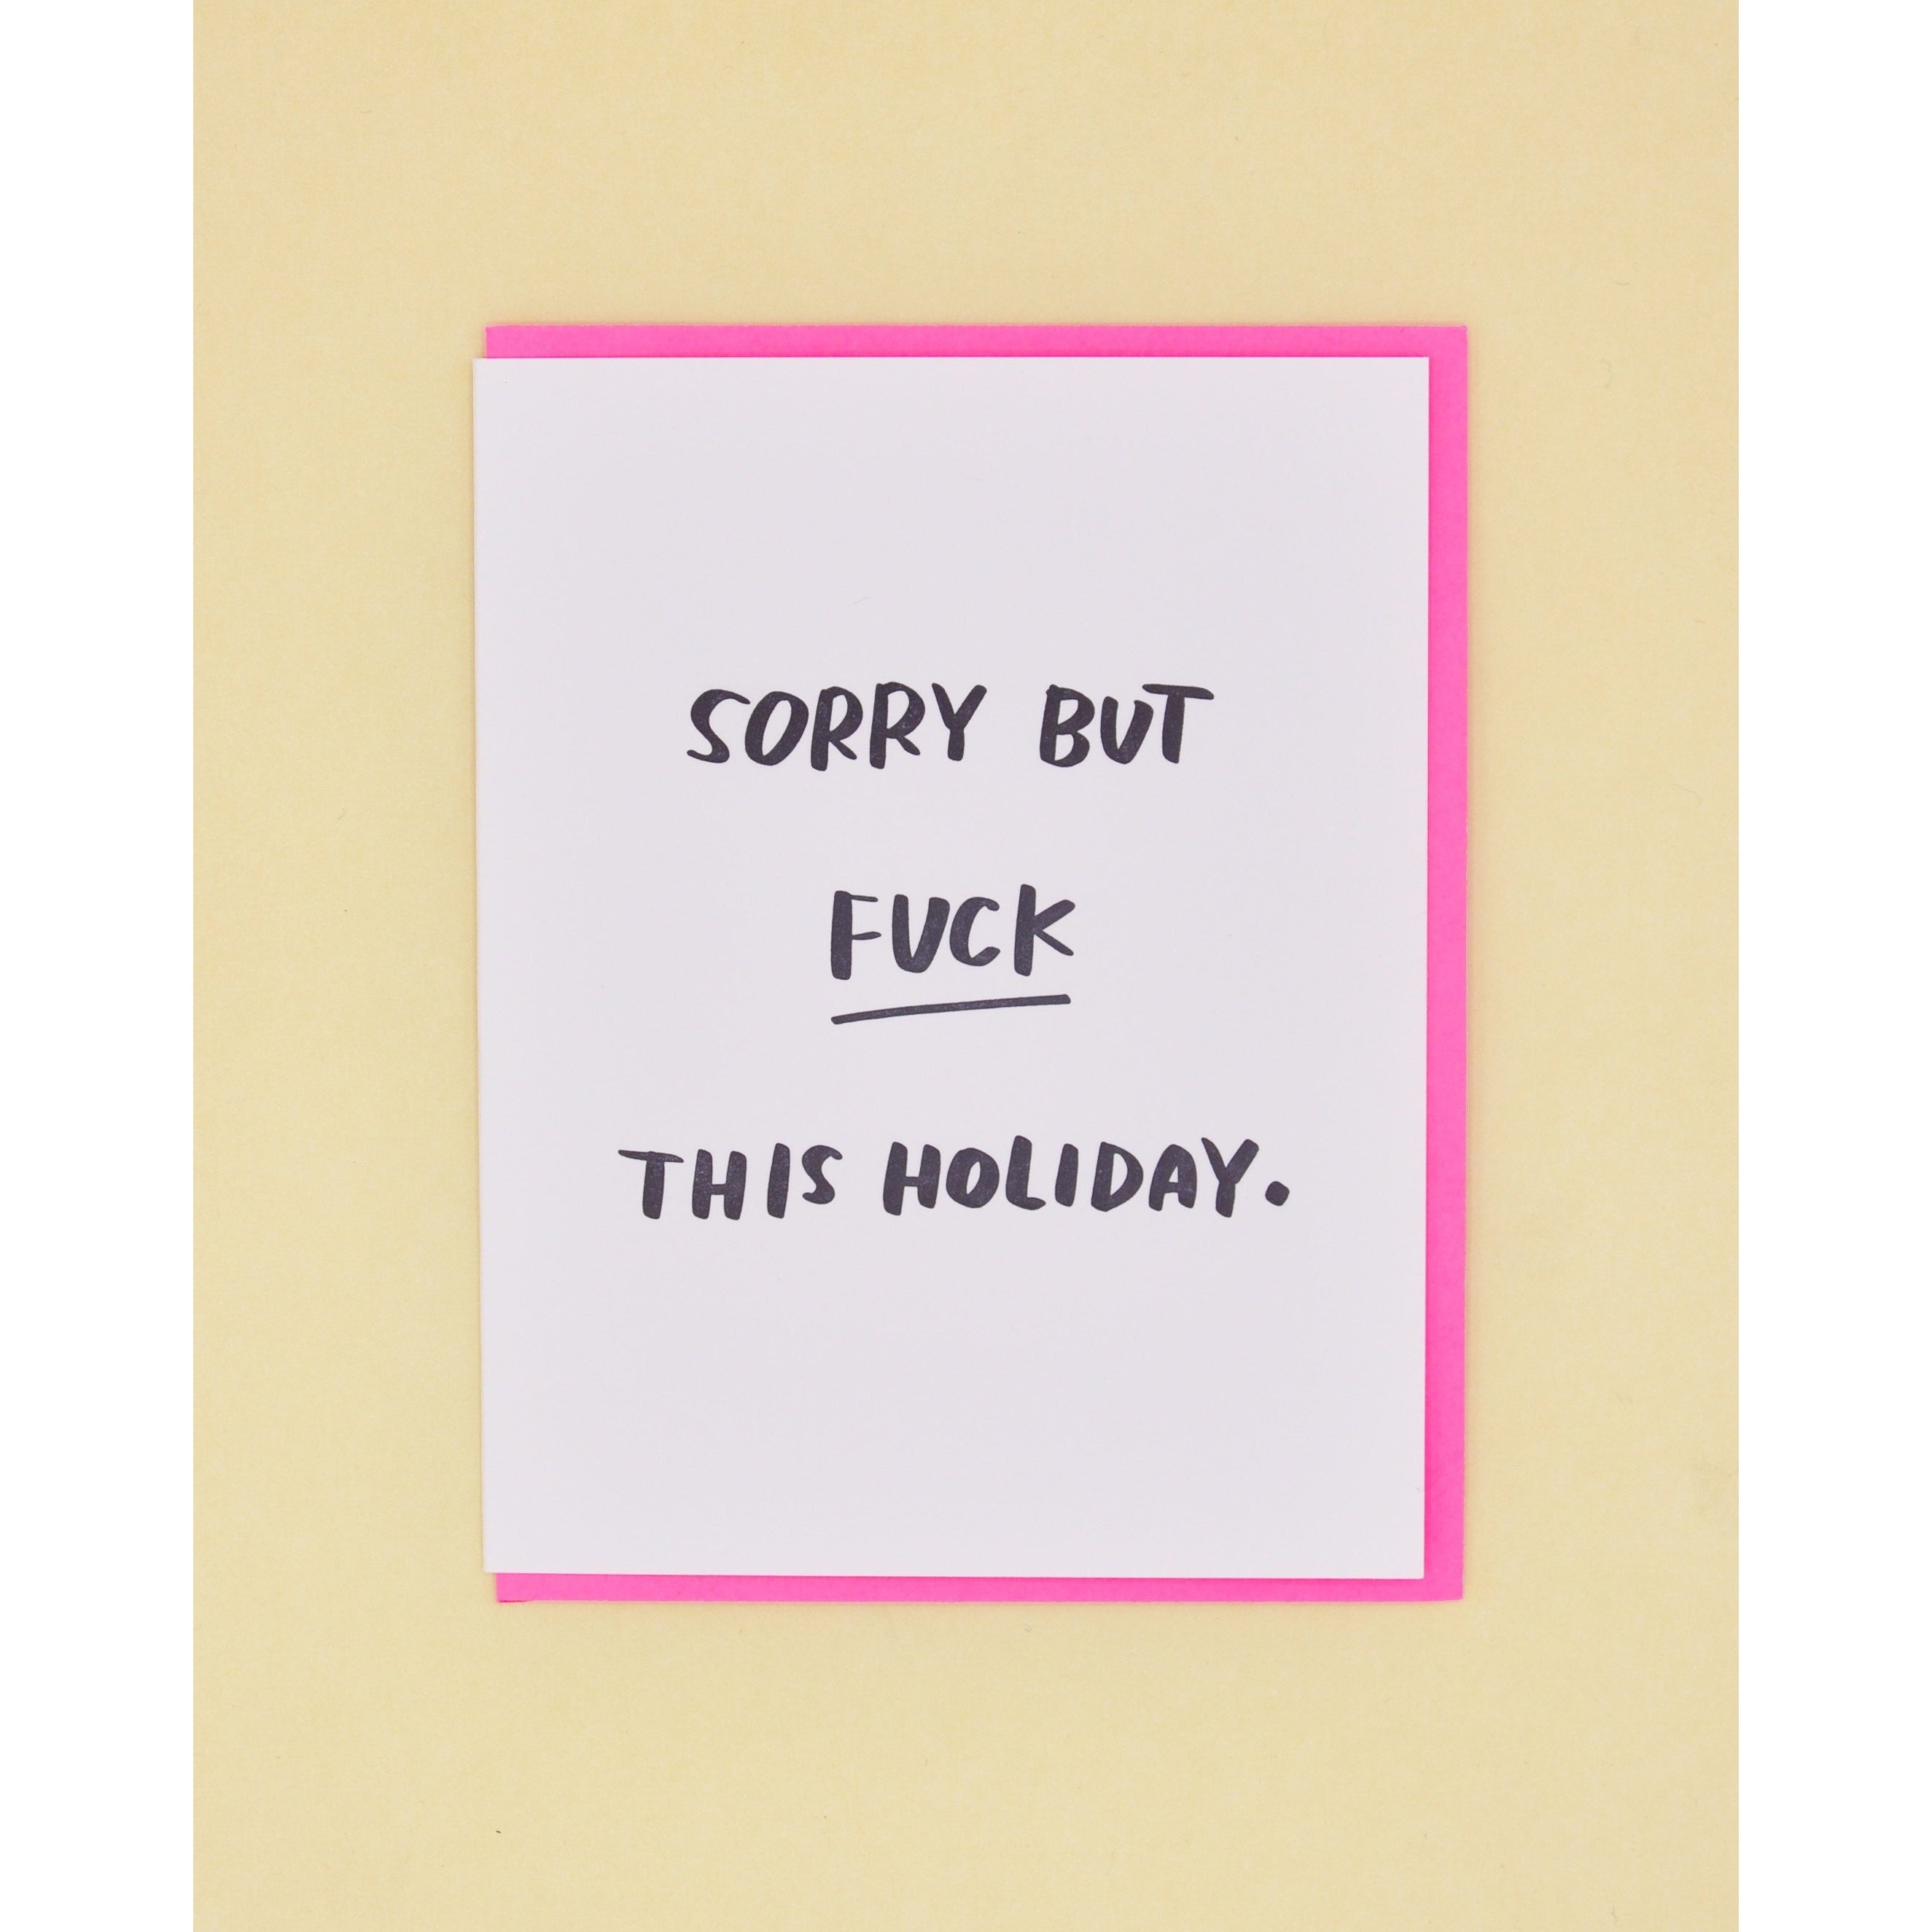 White card with black text saying, "Sorry But Fuck This Holiday". A neon pink envelope is included.